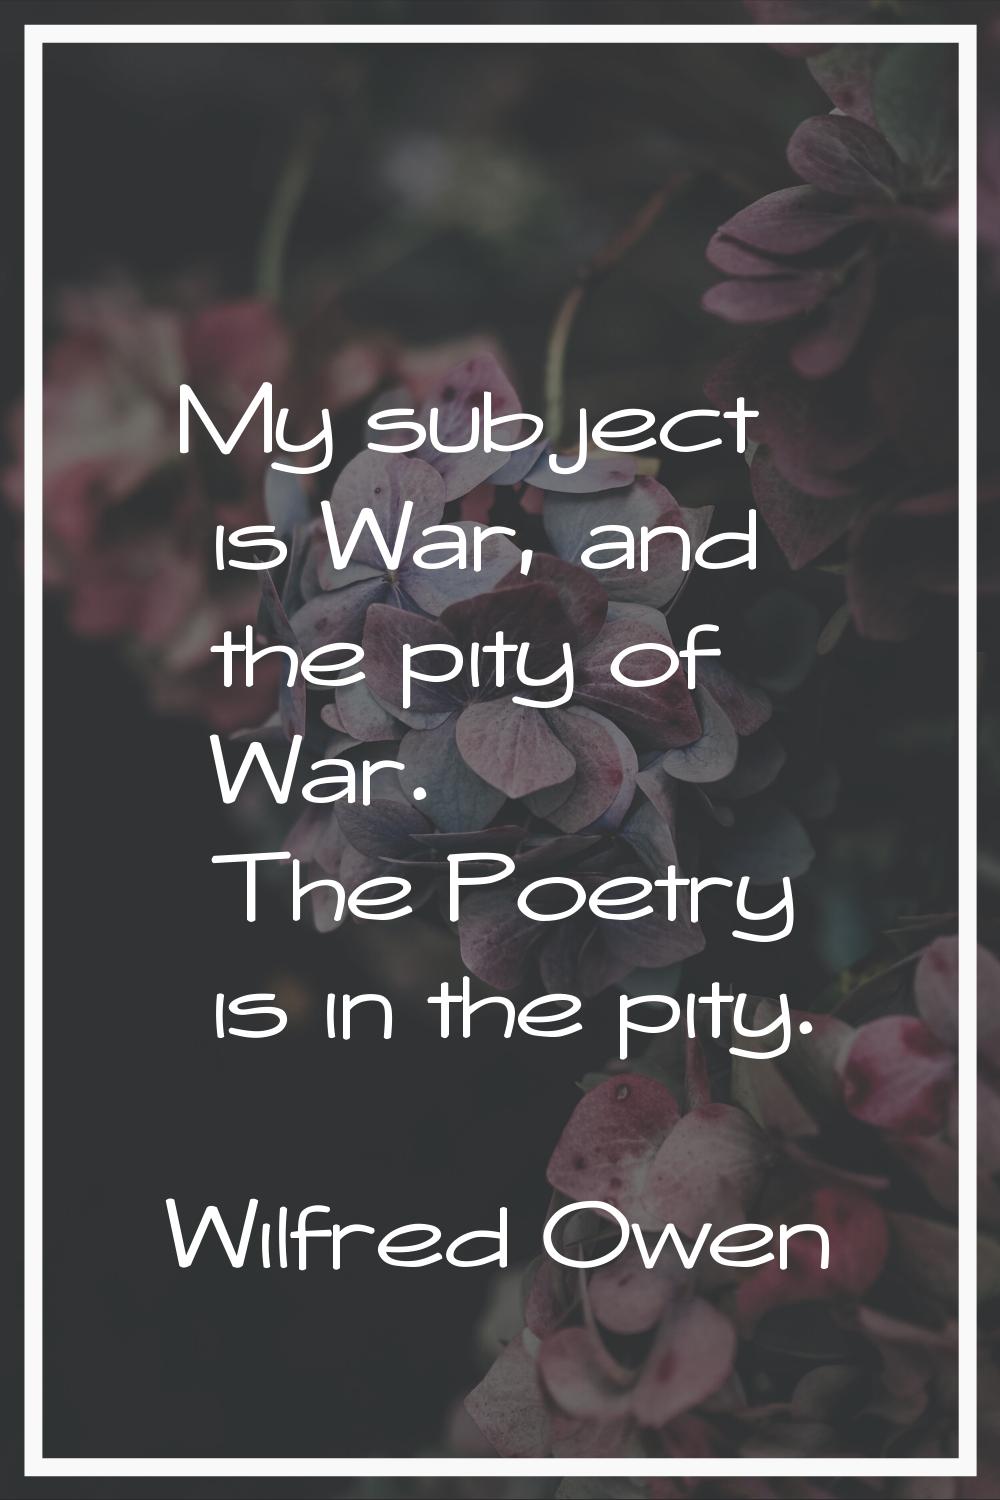 My subject is War, and the pity of War. The Poetry is in the pity.